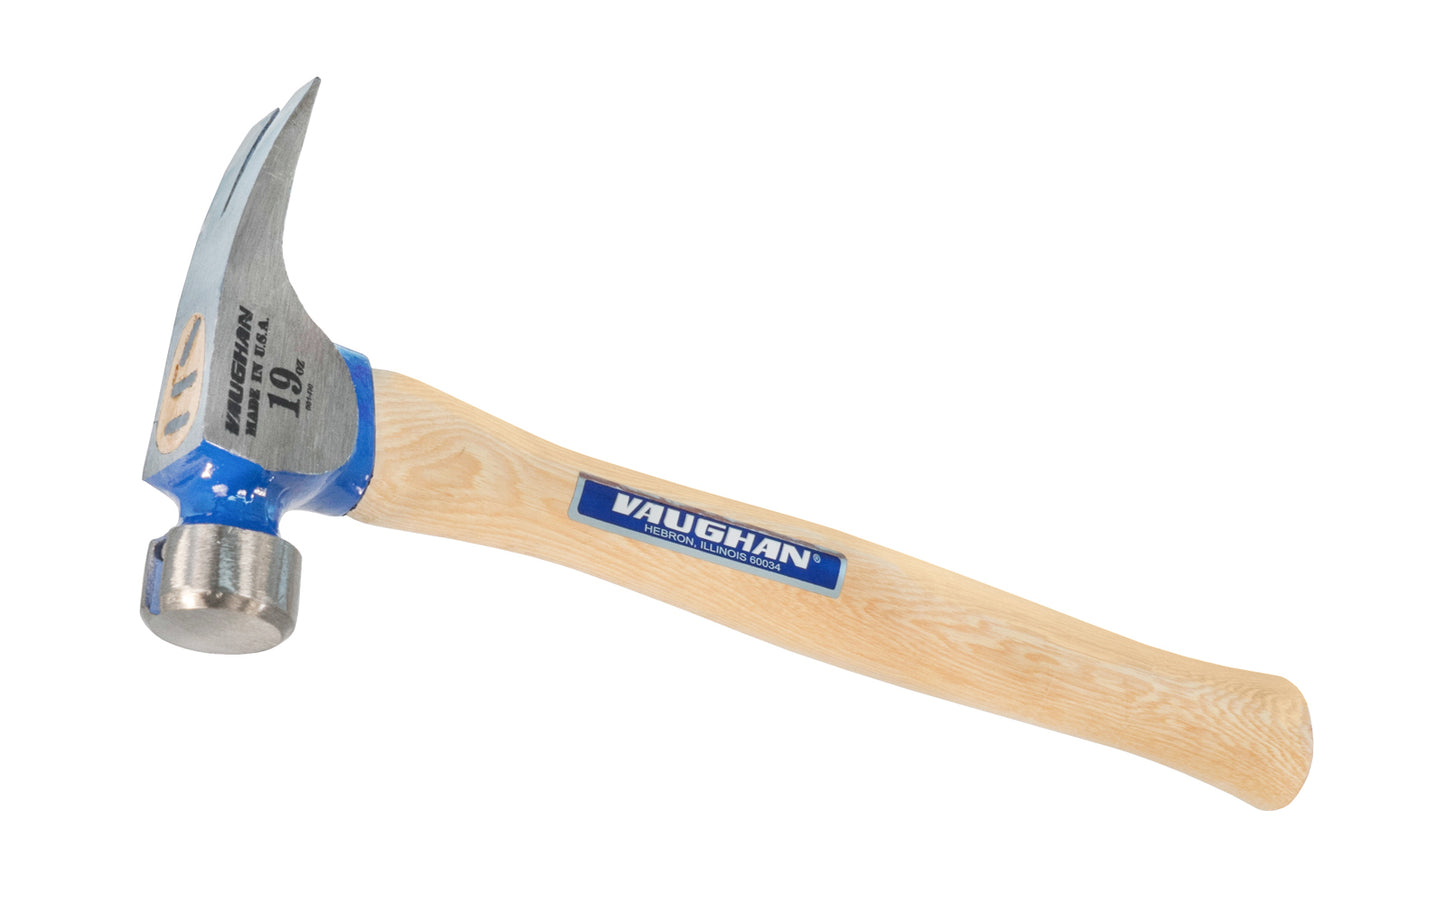 This 19 oz Vaughan California Framer Model CF2P has a smooth face & extra large 1-1/8" diameter striking face on framing hammer. The Rip hammer has magnetic nail starter & 19 oz head weight. Hickory hardwood handle & 7" overall length. Rust-resistant powder coat finish. Model CF2P. 051218116014.